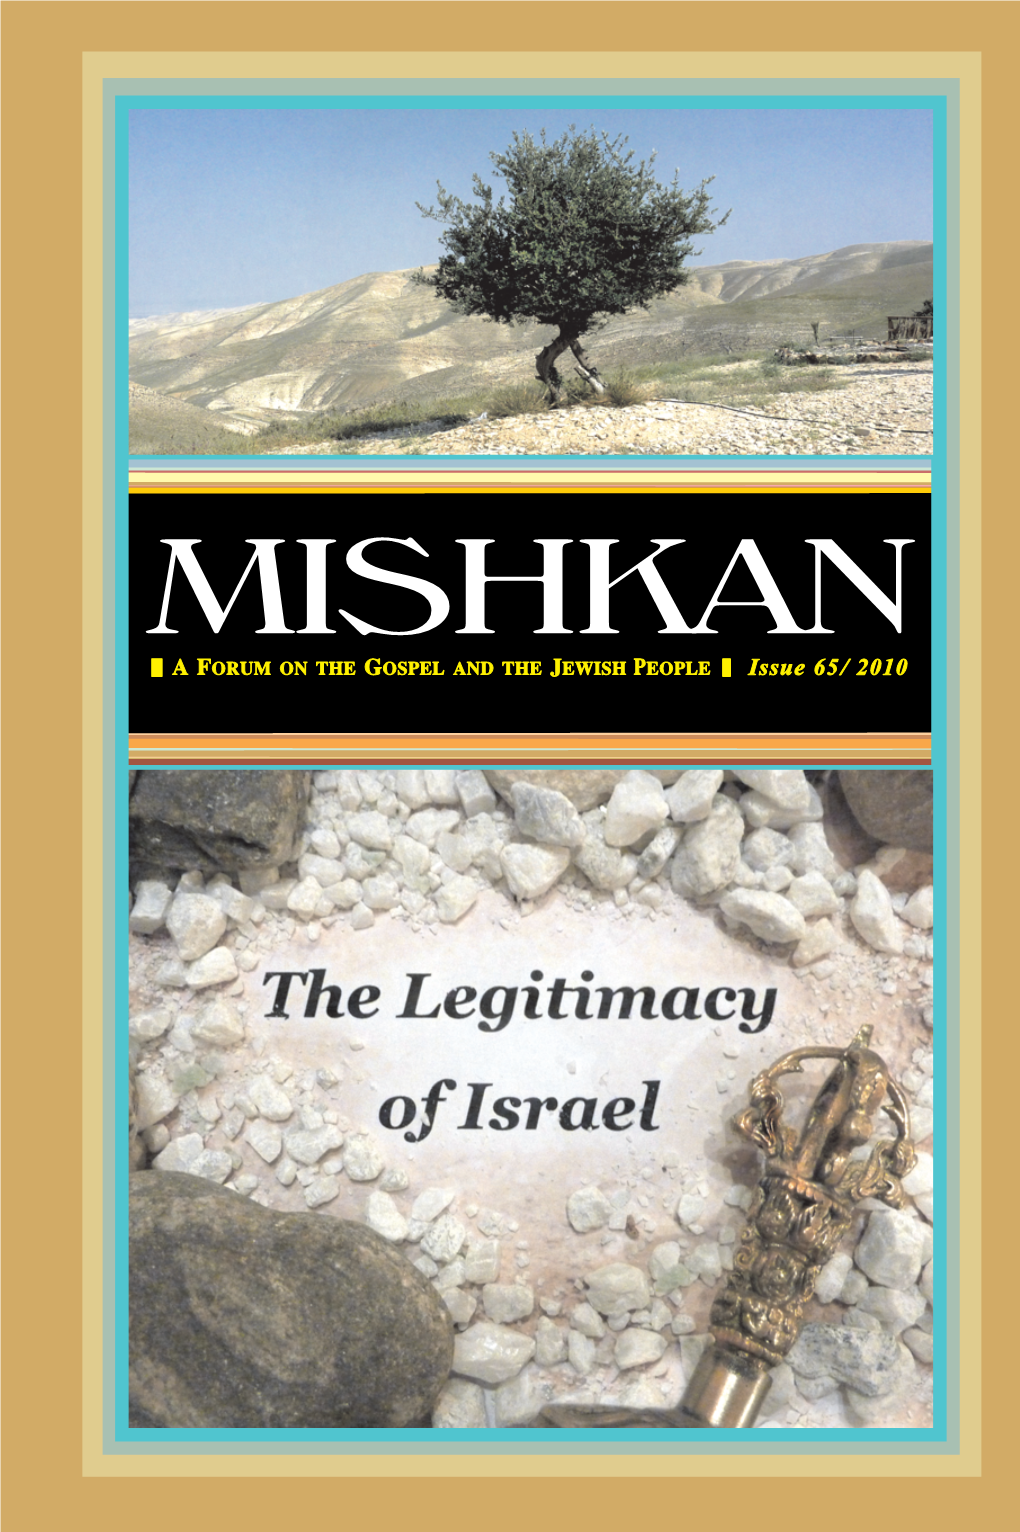 Mishkan a Forum on the Gospel and the Jewish People